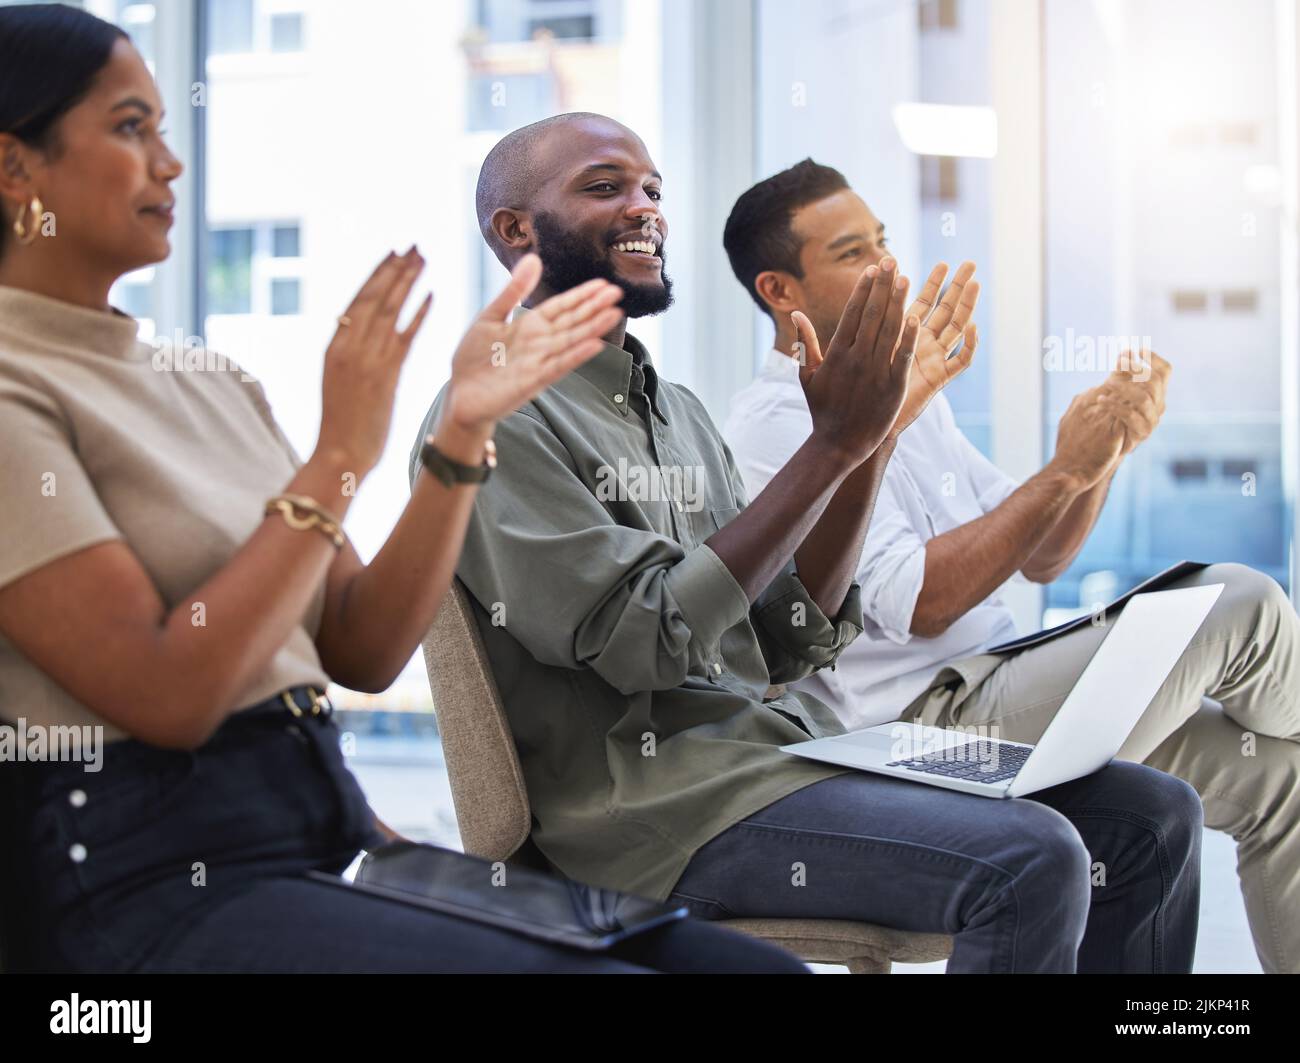 Weve learned alot today. a group of people clapping and smiling during a meeting at work. Stock Photo